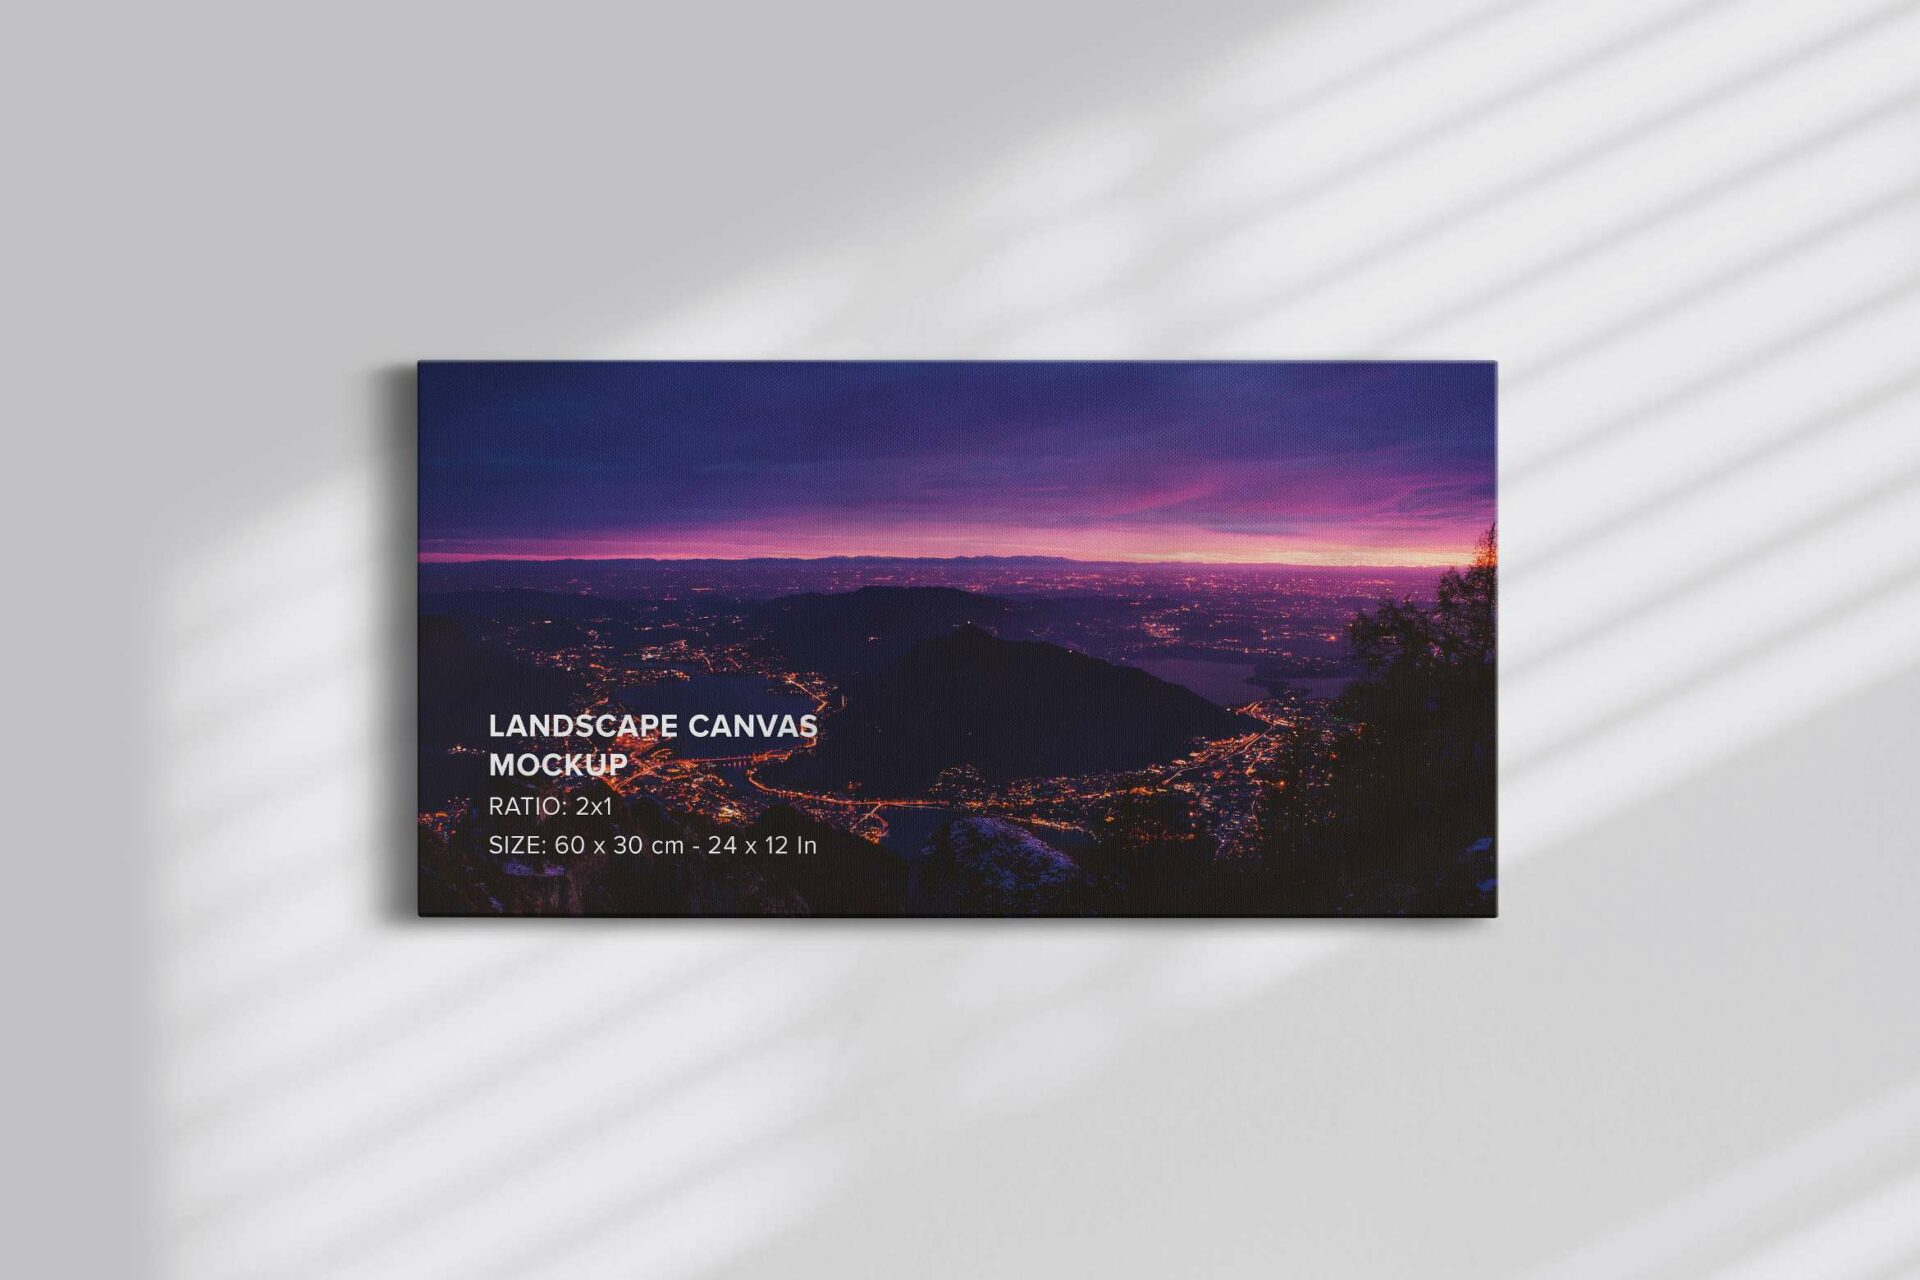 2x1 Landscape Canvas Hanging On Wall Mockup